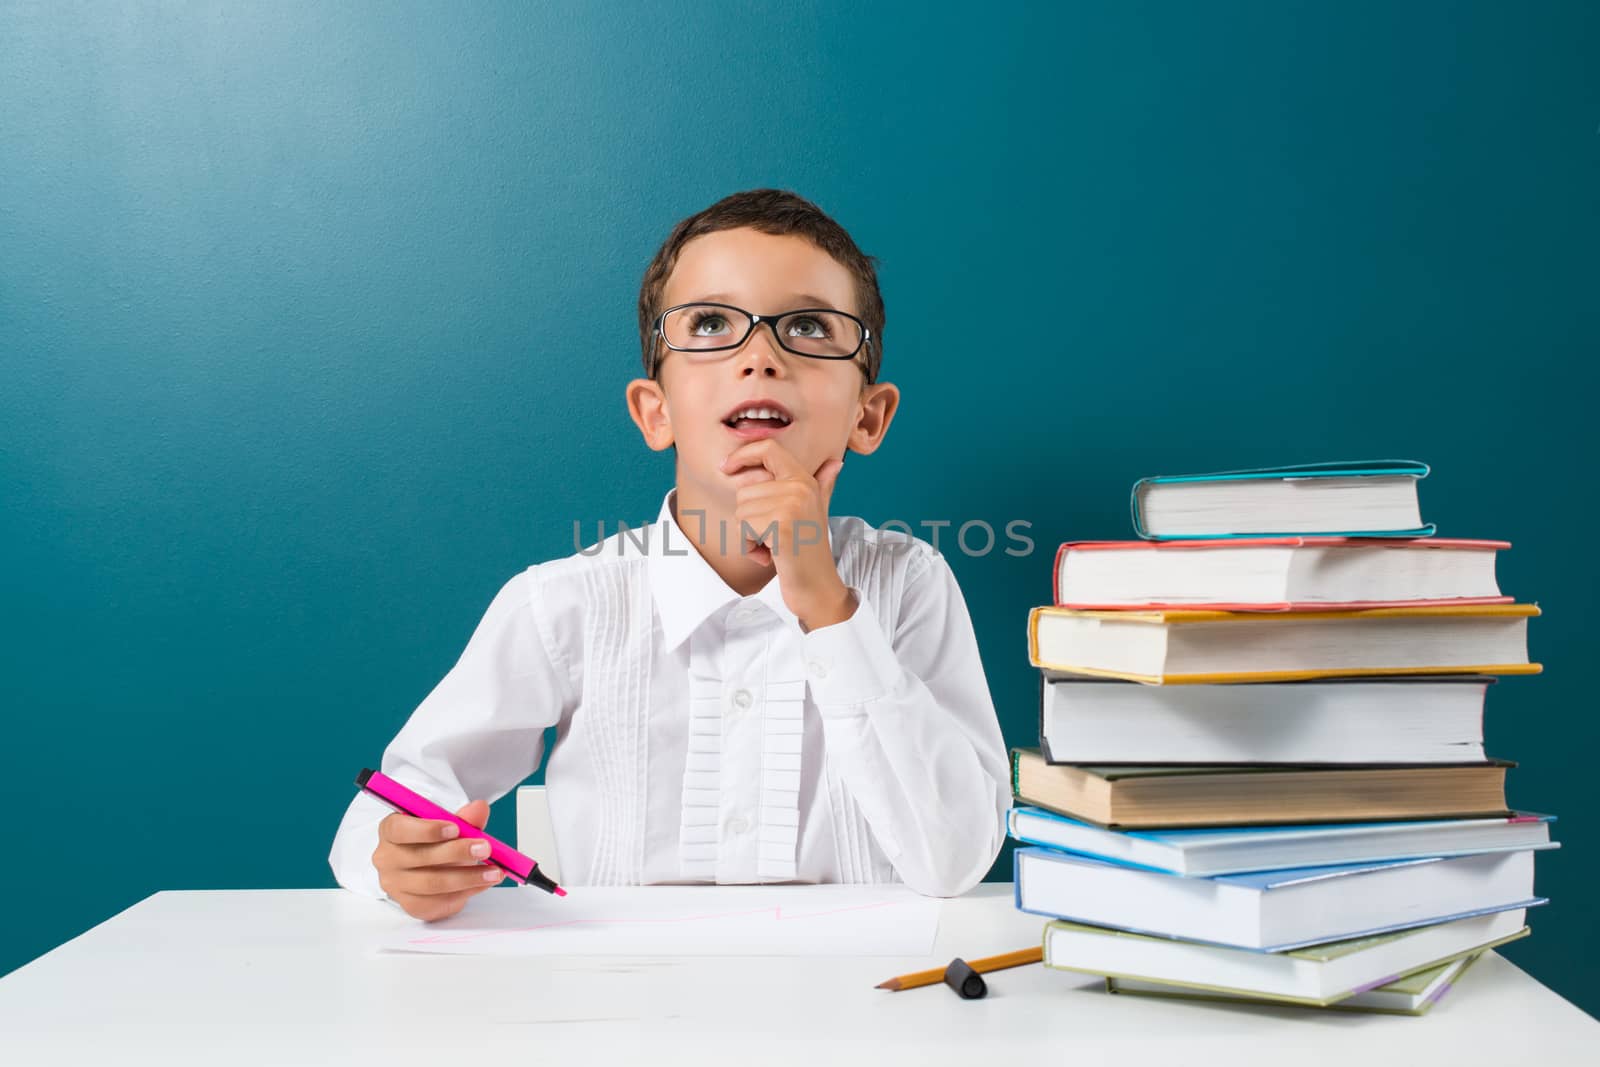 Cute little boy with books on the table, blue background